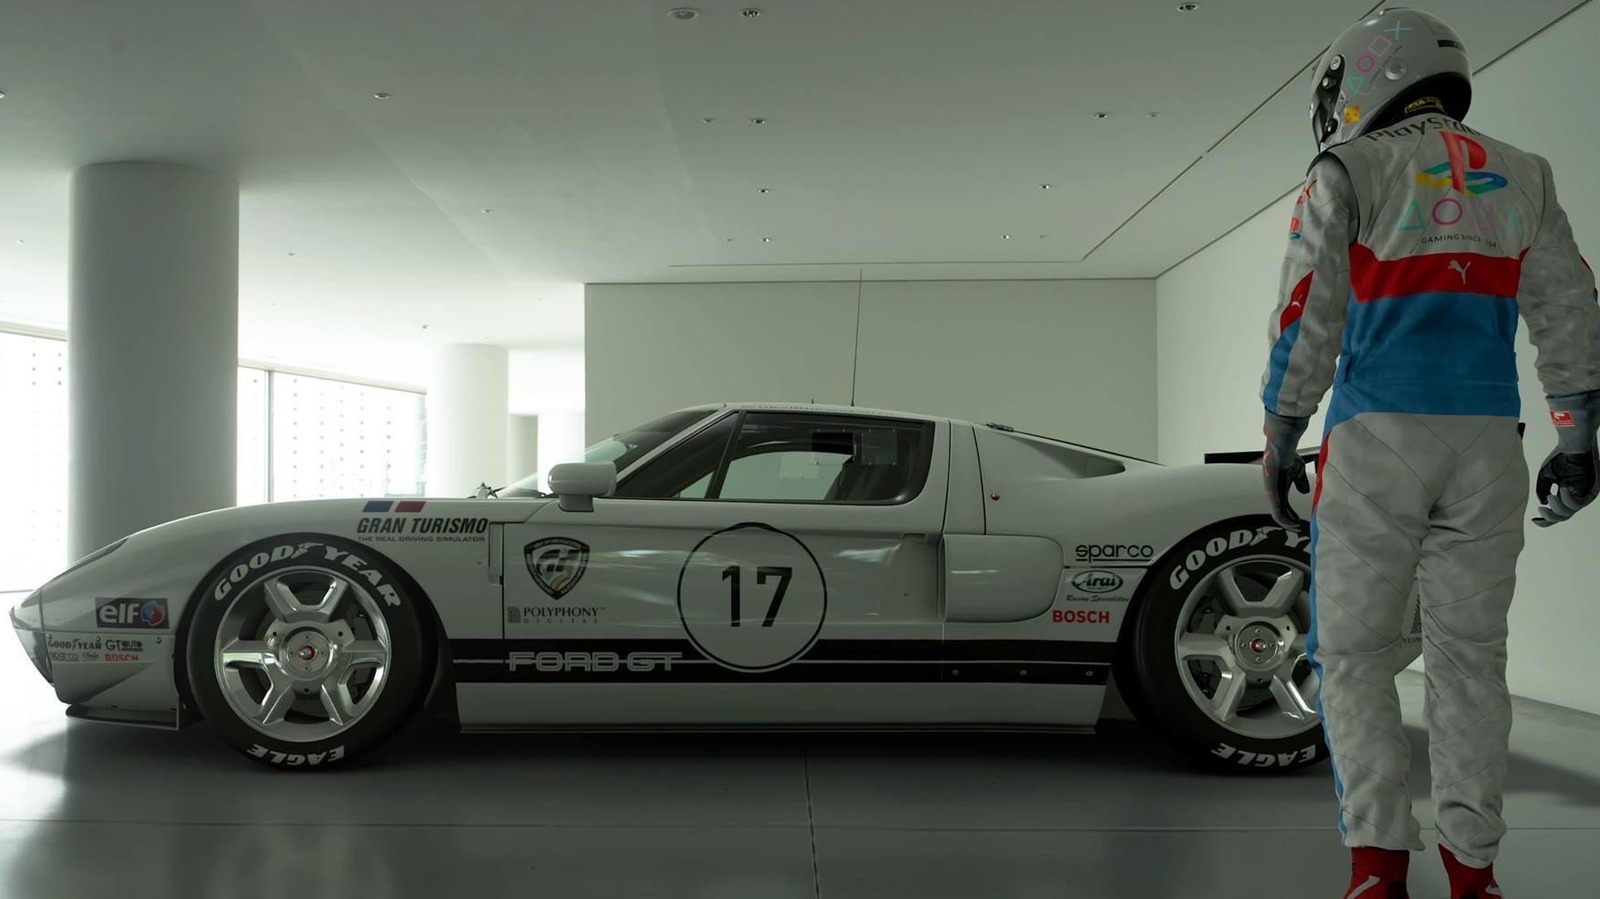 Cheats for PS2 classic Gran Turismo 4 discovered after nearly 20 years